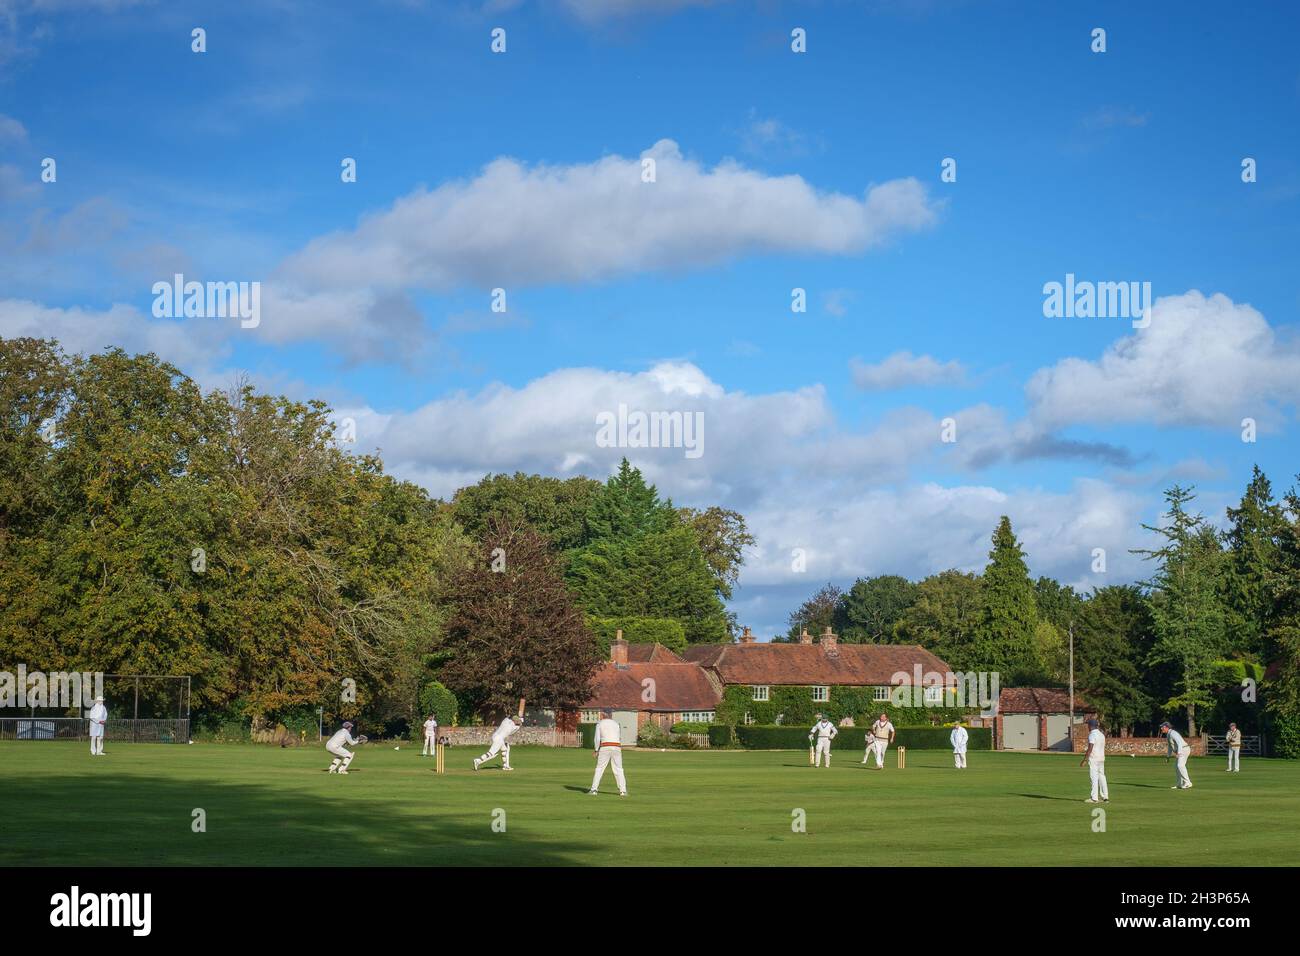 Village cricket on the village green at Rotherfield Greys, Oxfordshire Stock Photo